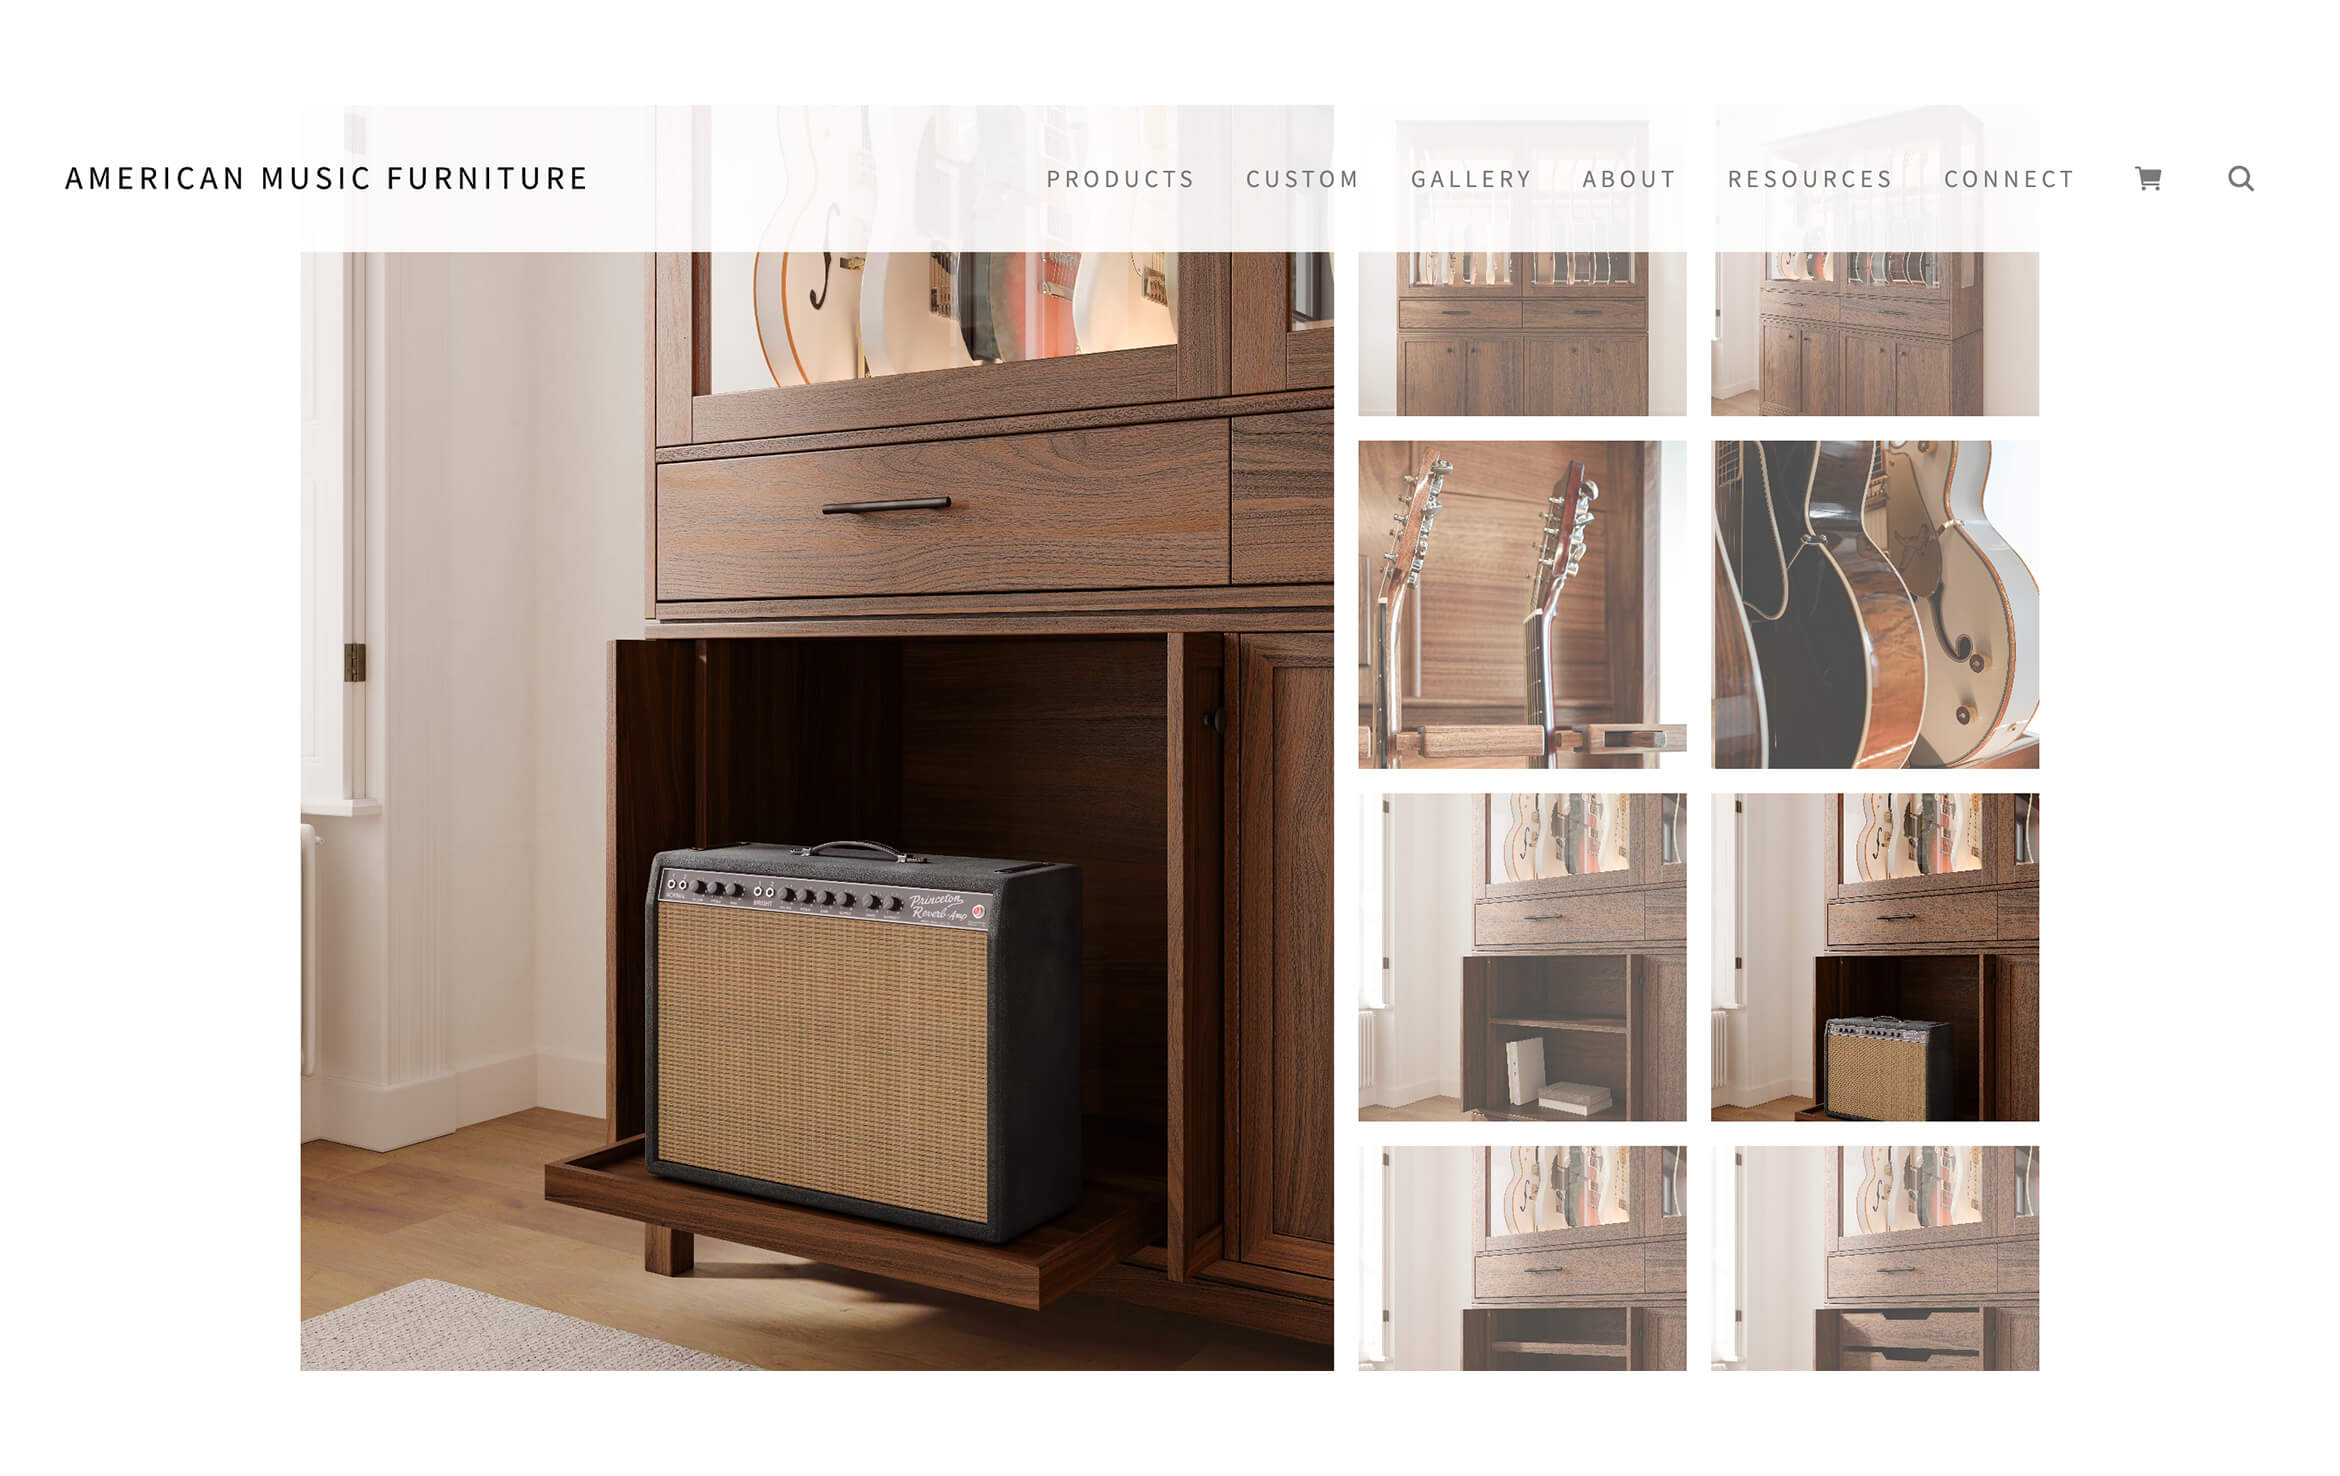 CG Rendering for American Music Furniture Site's Product List